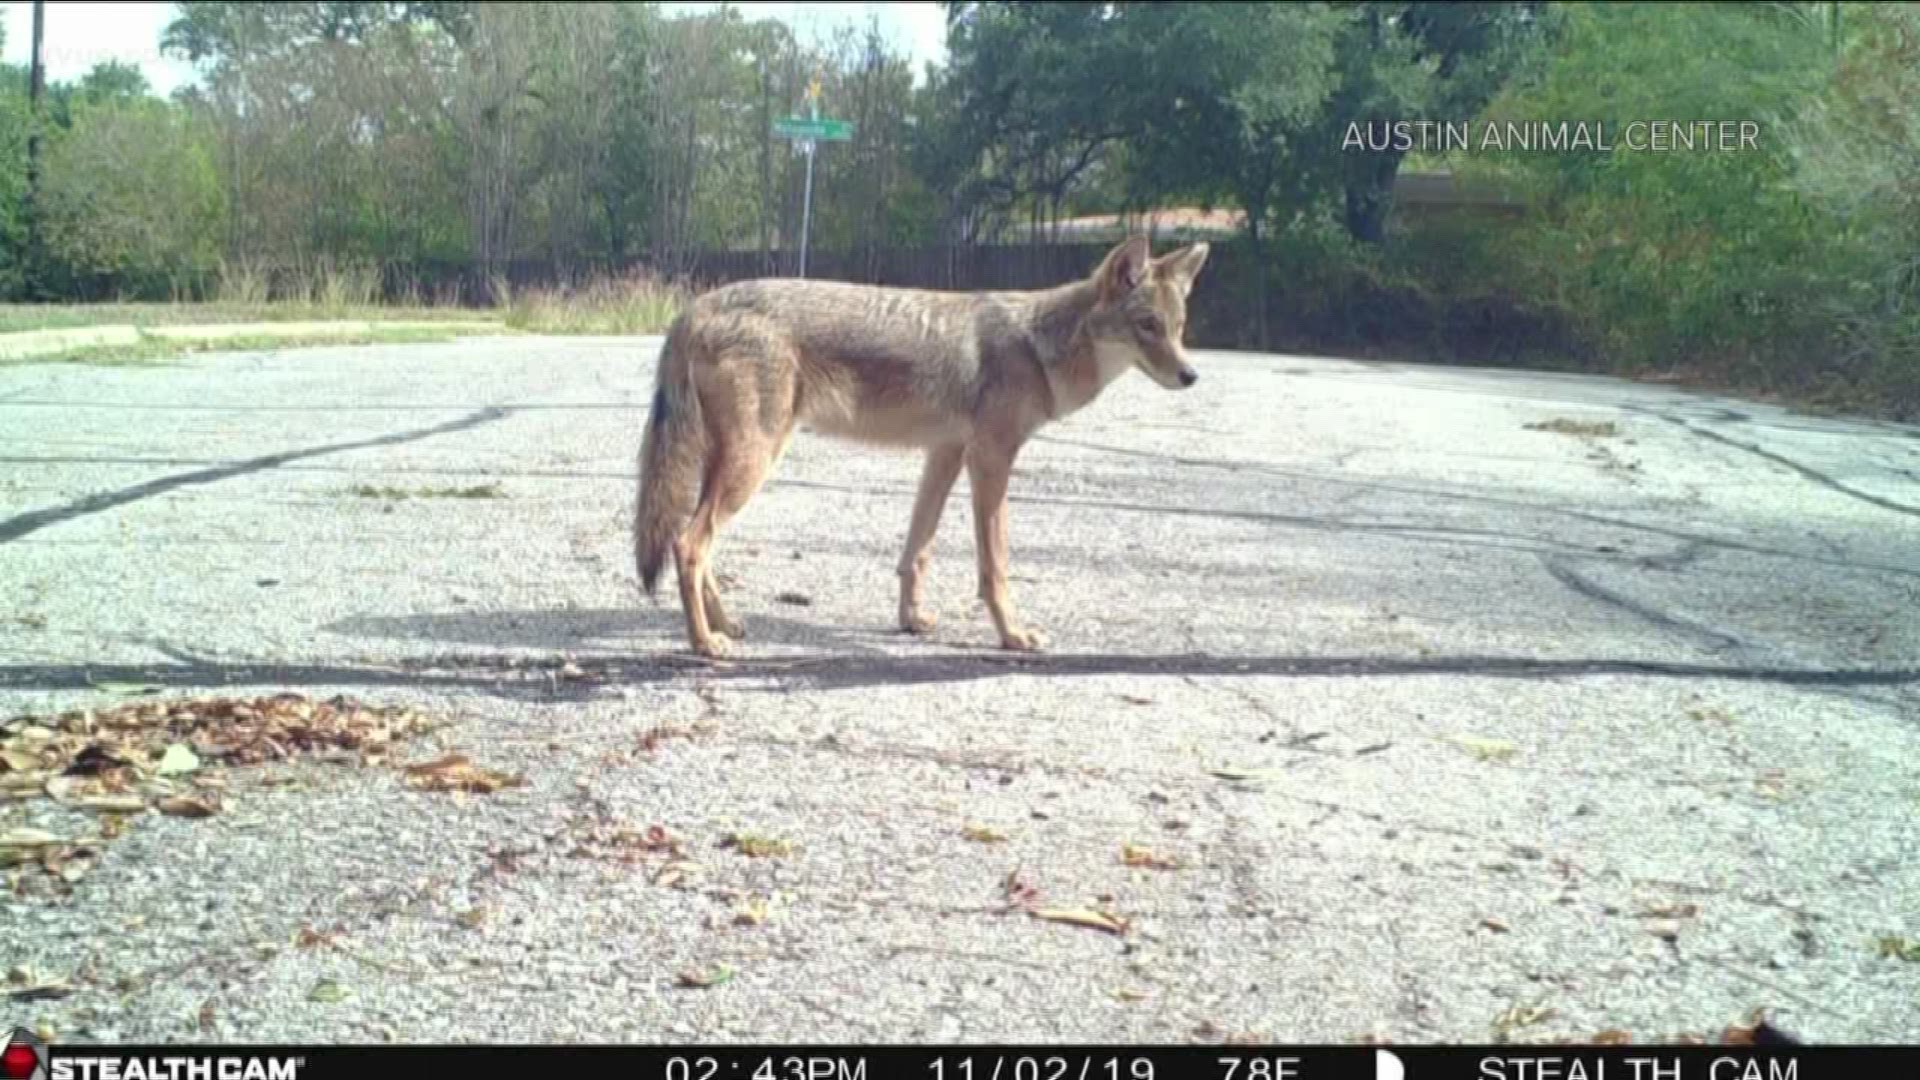 You may want to keep an eye out for coyotes around the Austin area.